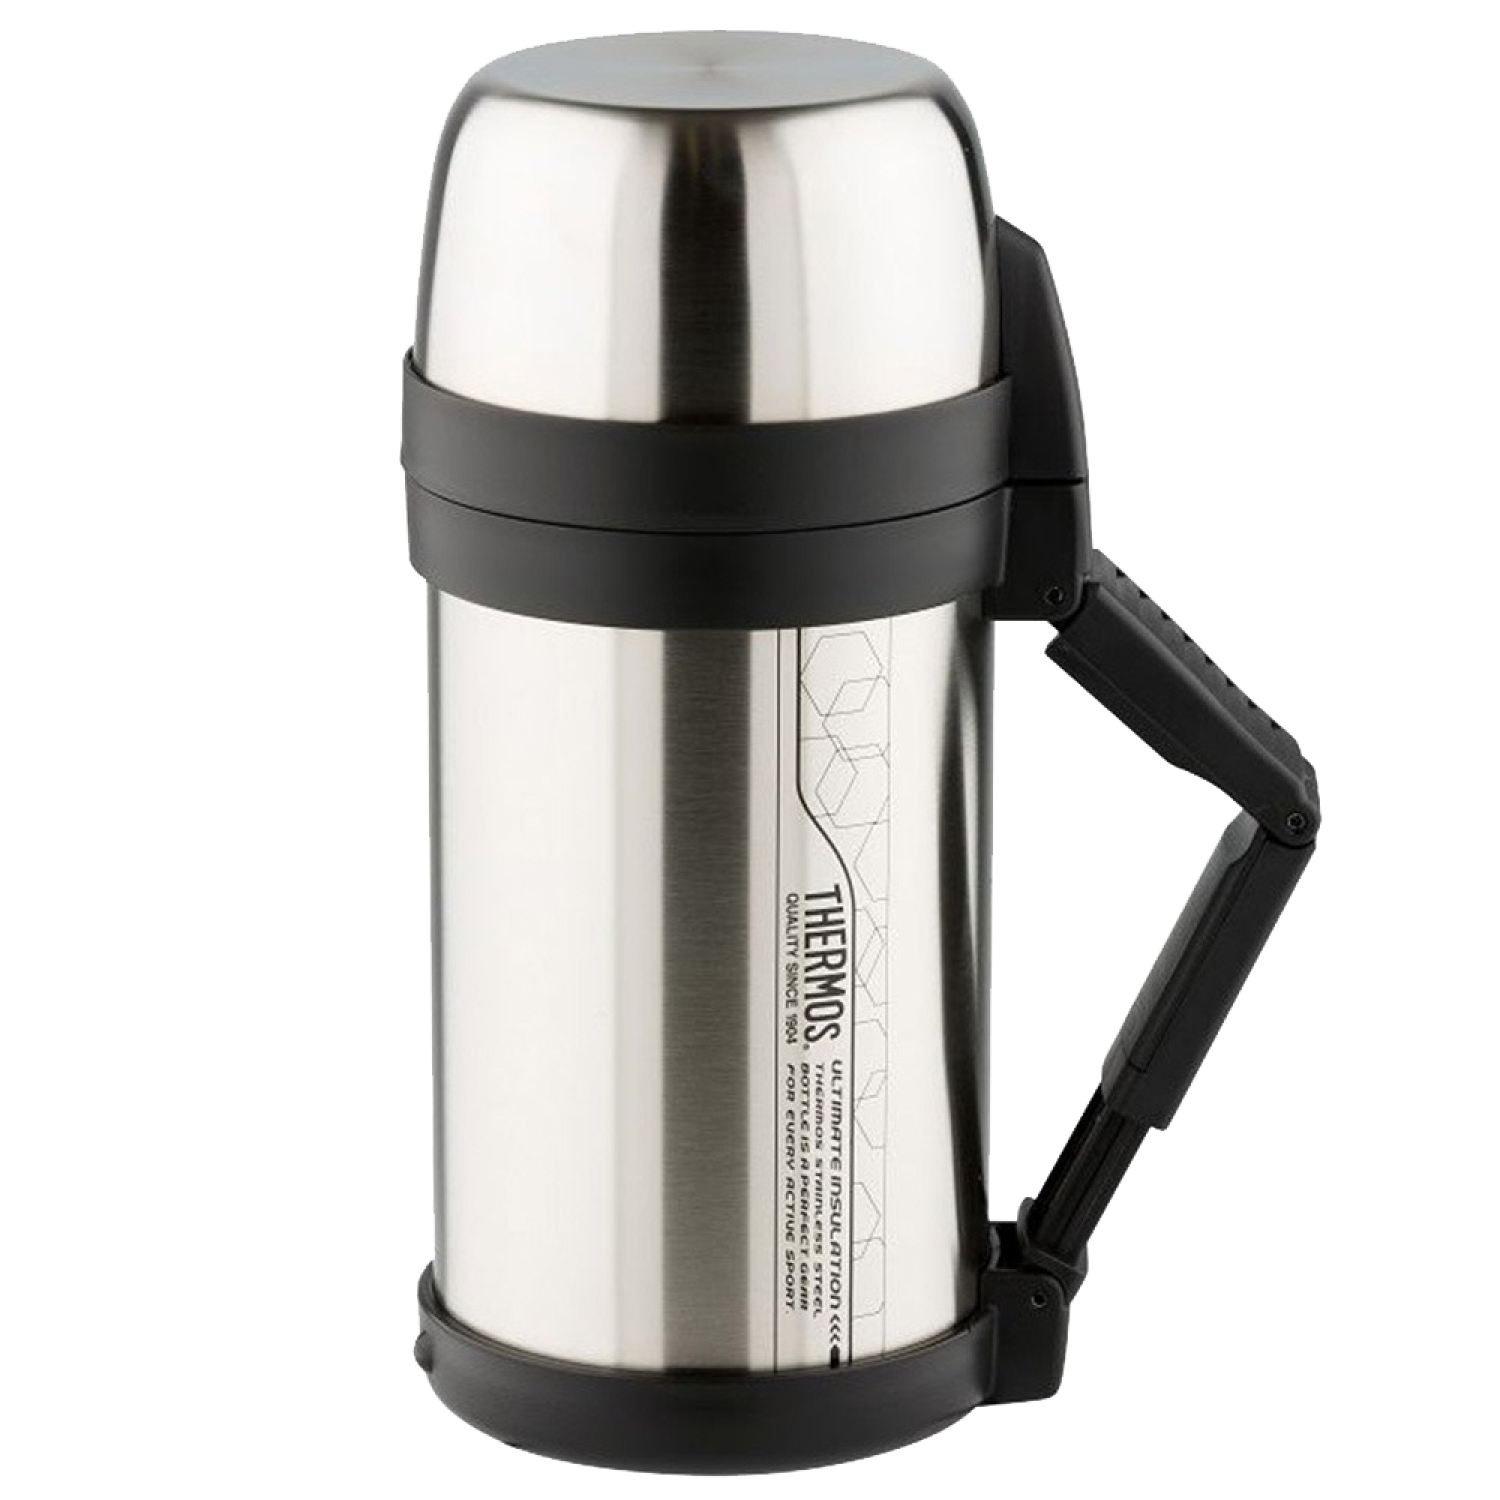 Термос Thermos FDH-2005 Stainless Steel 2,0л термос thermos fdh stainless steel vacuum flask 1 4l 923639